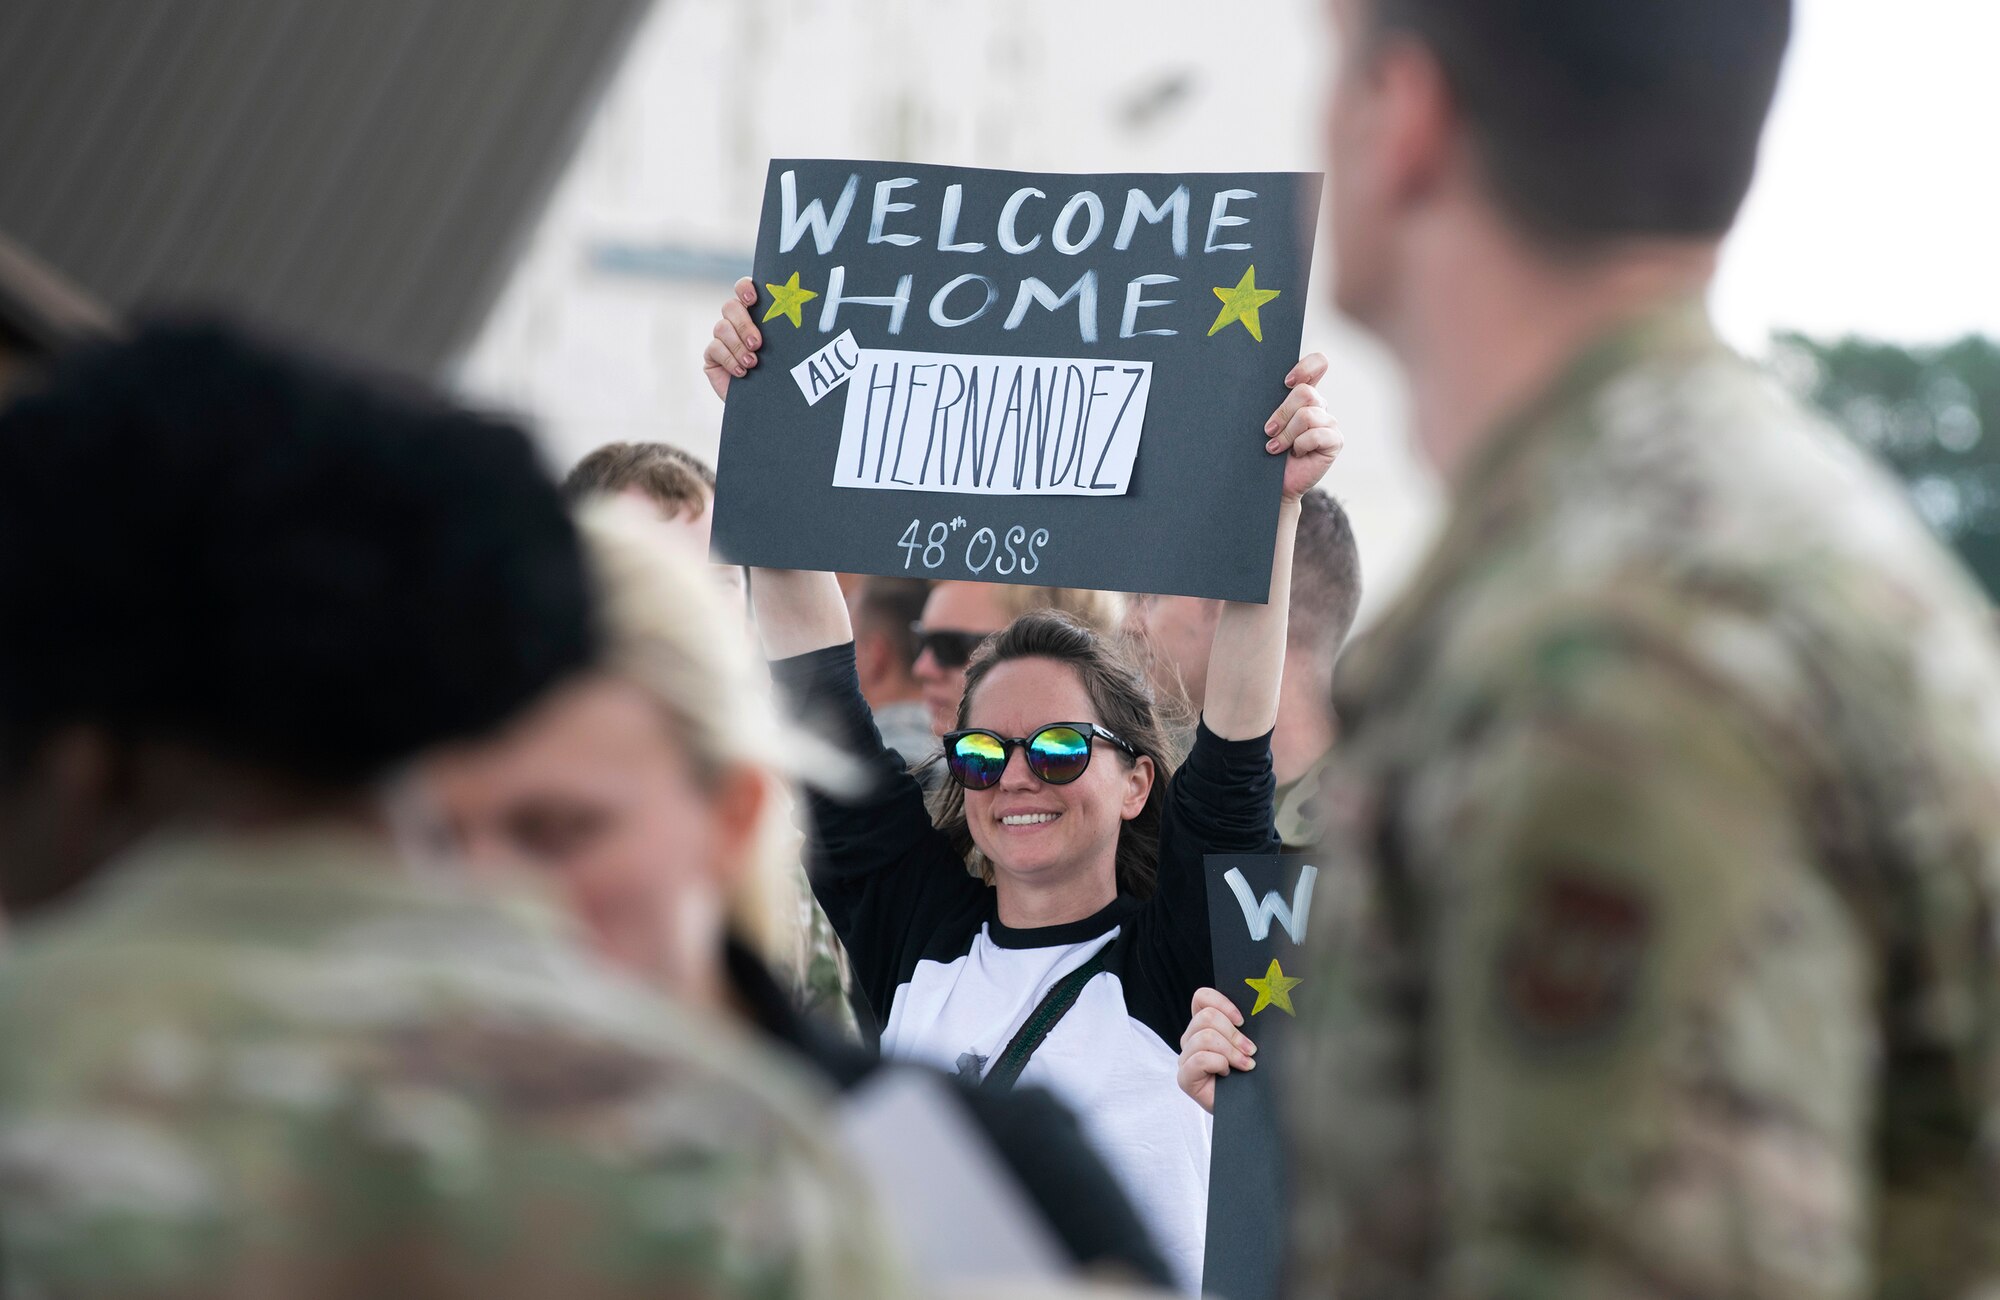 Friends and family members welcome home Airmen from the 48th Fighter Wing at Royal Air Force Lakenheath, England, July 12, 2019. Members of the 493rd Fighter Squadron and 748th Aircraft Maintenance Squadron were deployed to an undisclosed location for six months. (U.S. Air Force photo by Senior Airman Malcolm Mayfield)